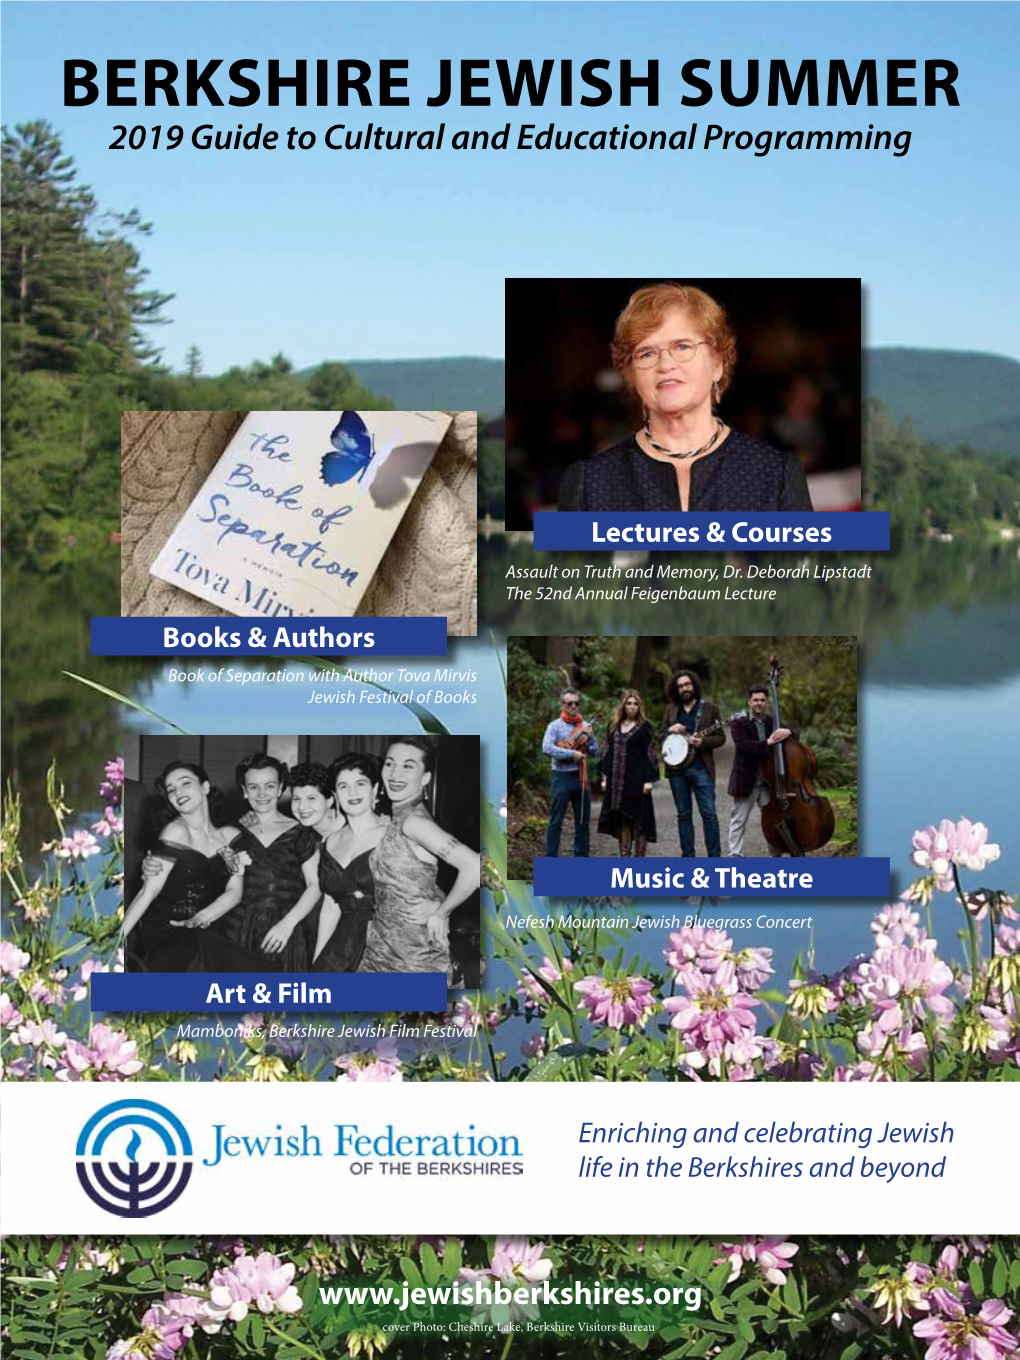 BERKSHIRE JEWISH SUMMER 2019 Guide to Cultural and Educational Programming